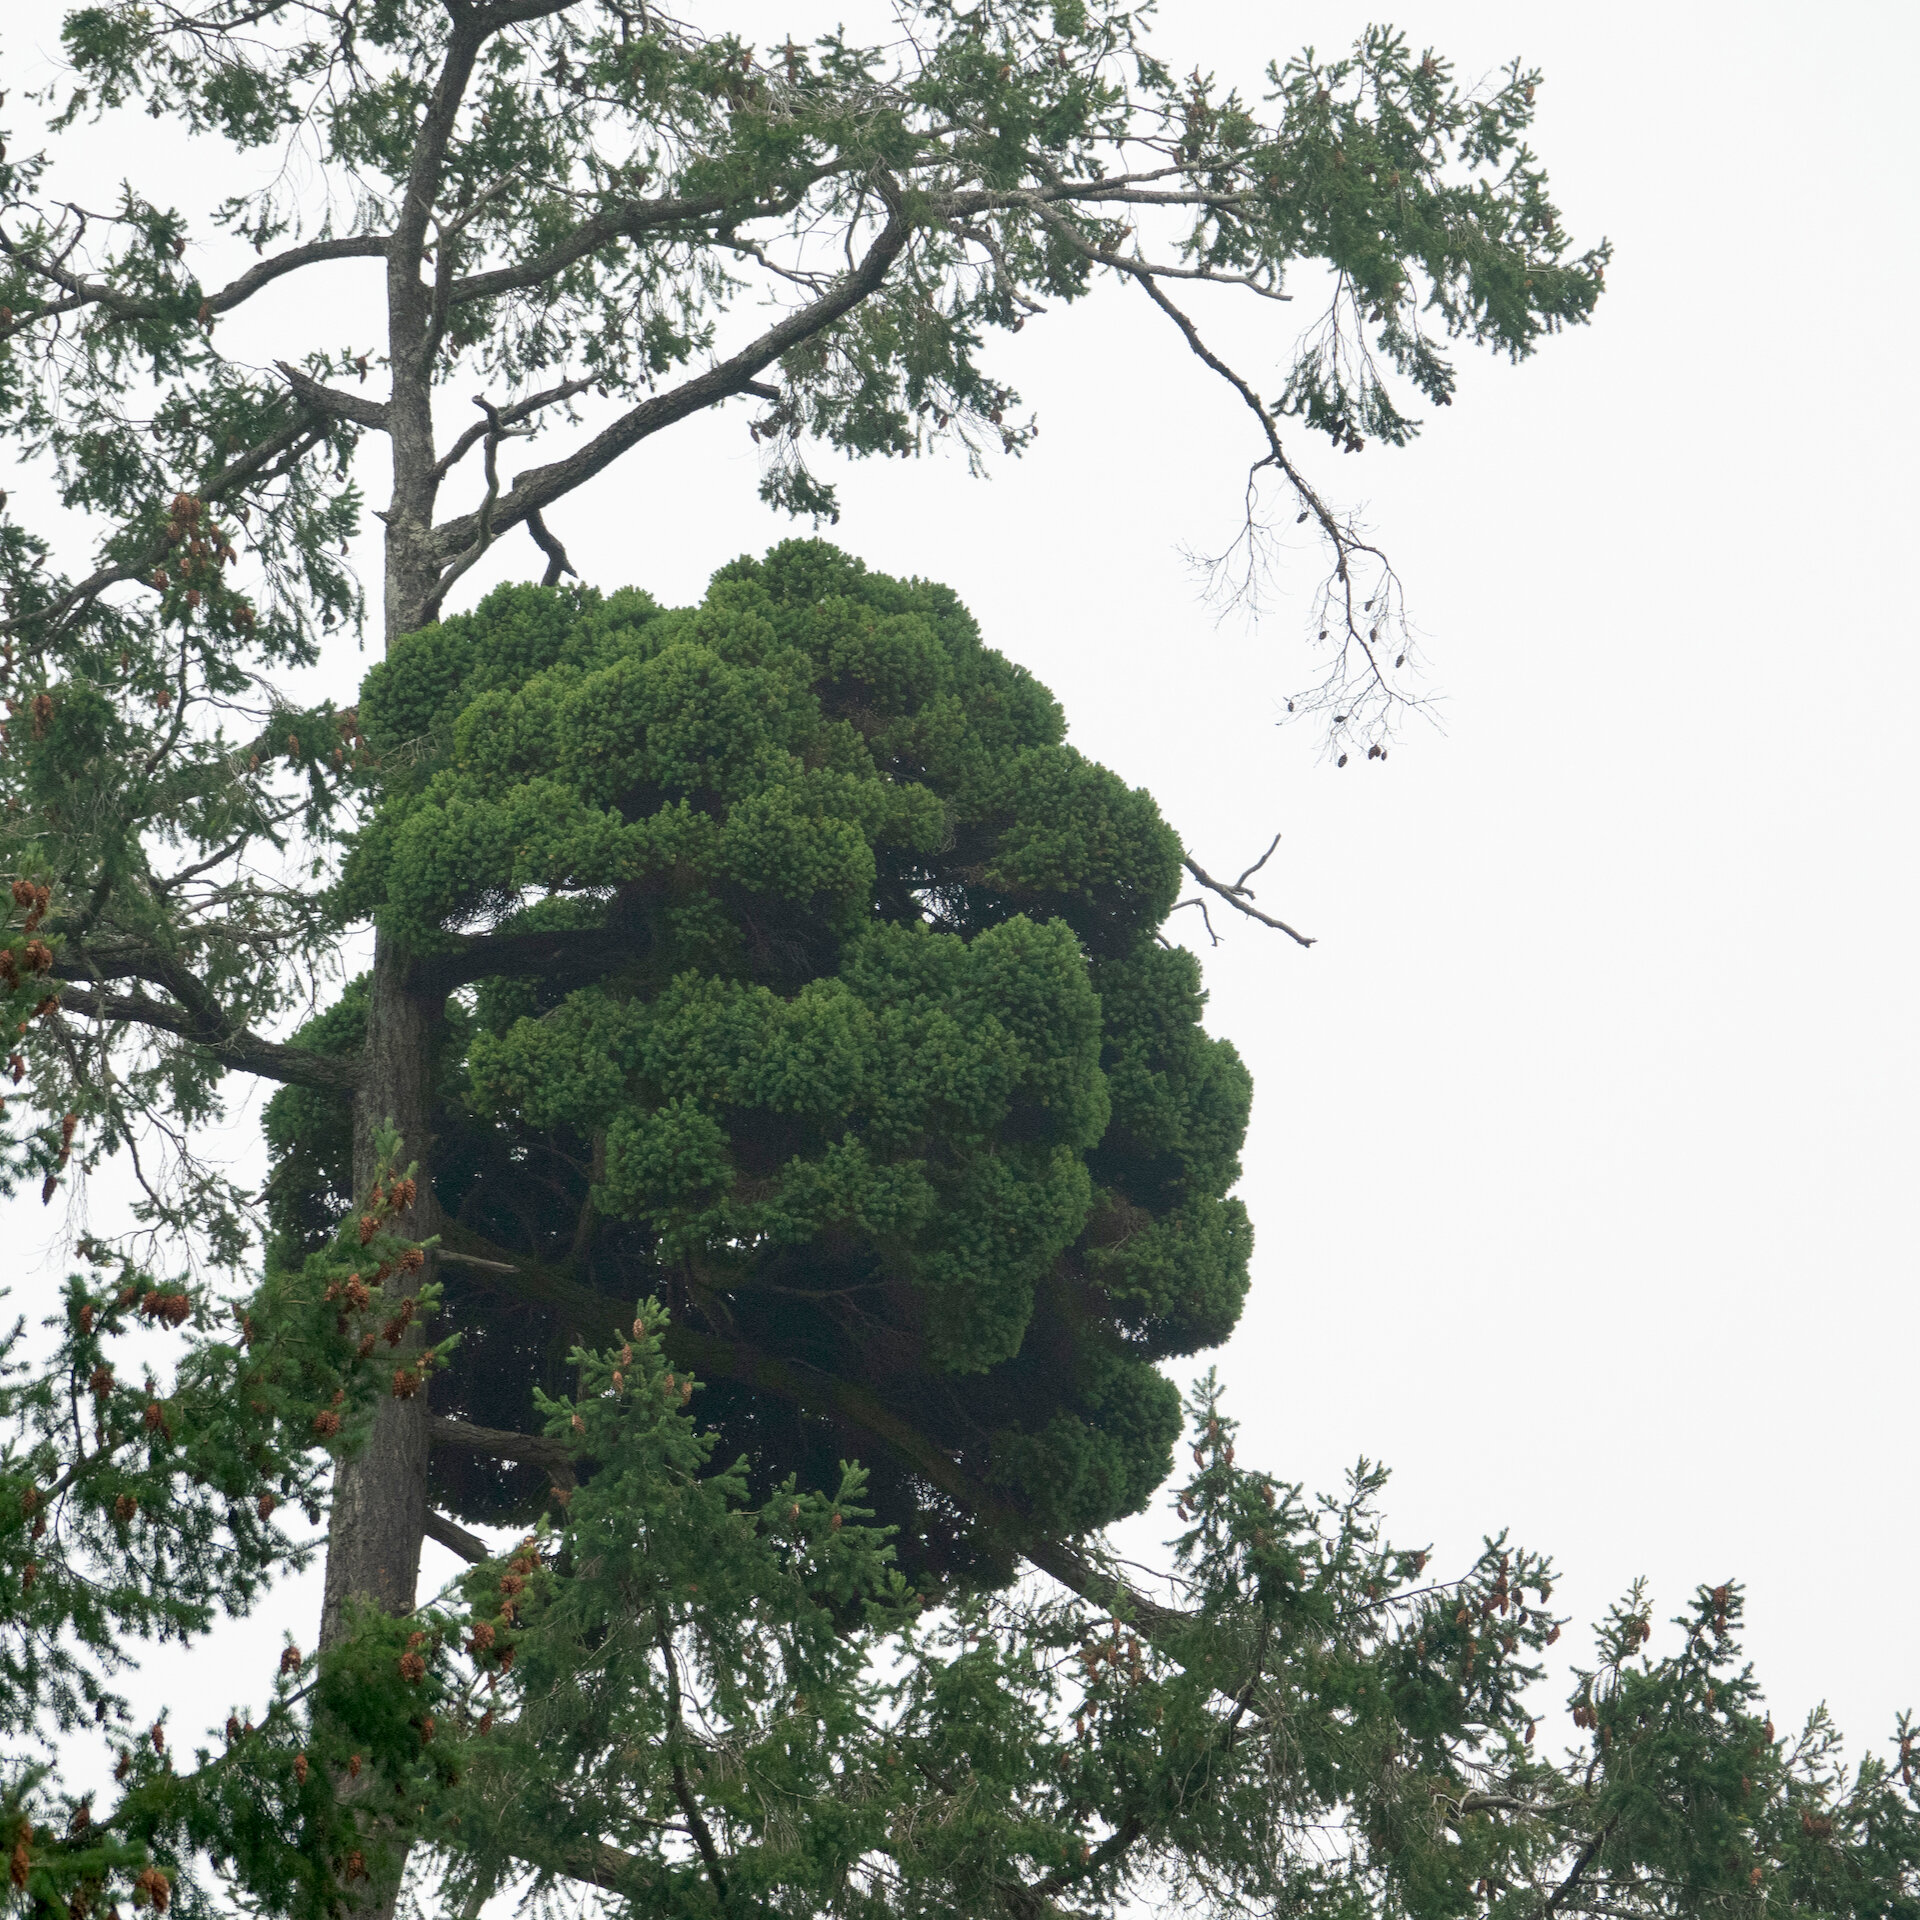  I’ve never quite seen anything like this - a tree growing out of a tree, a good 50-60’ up in the air. 